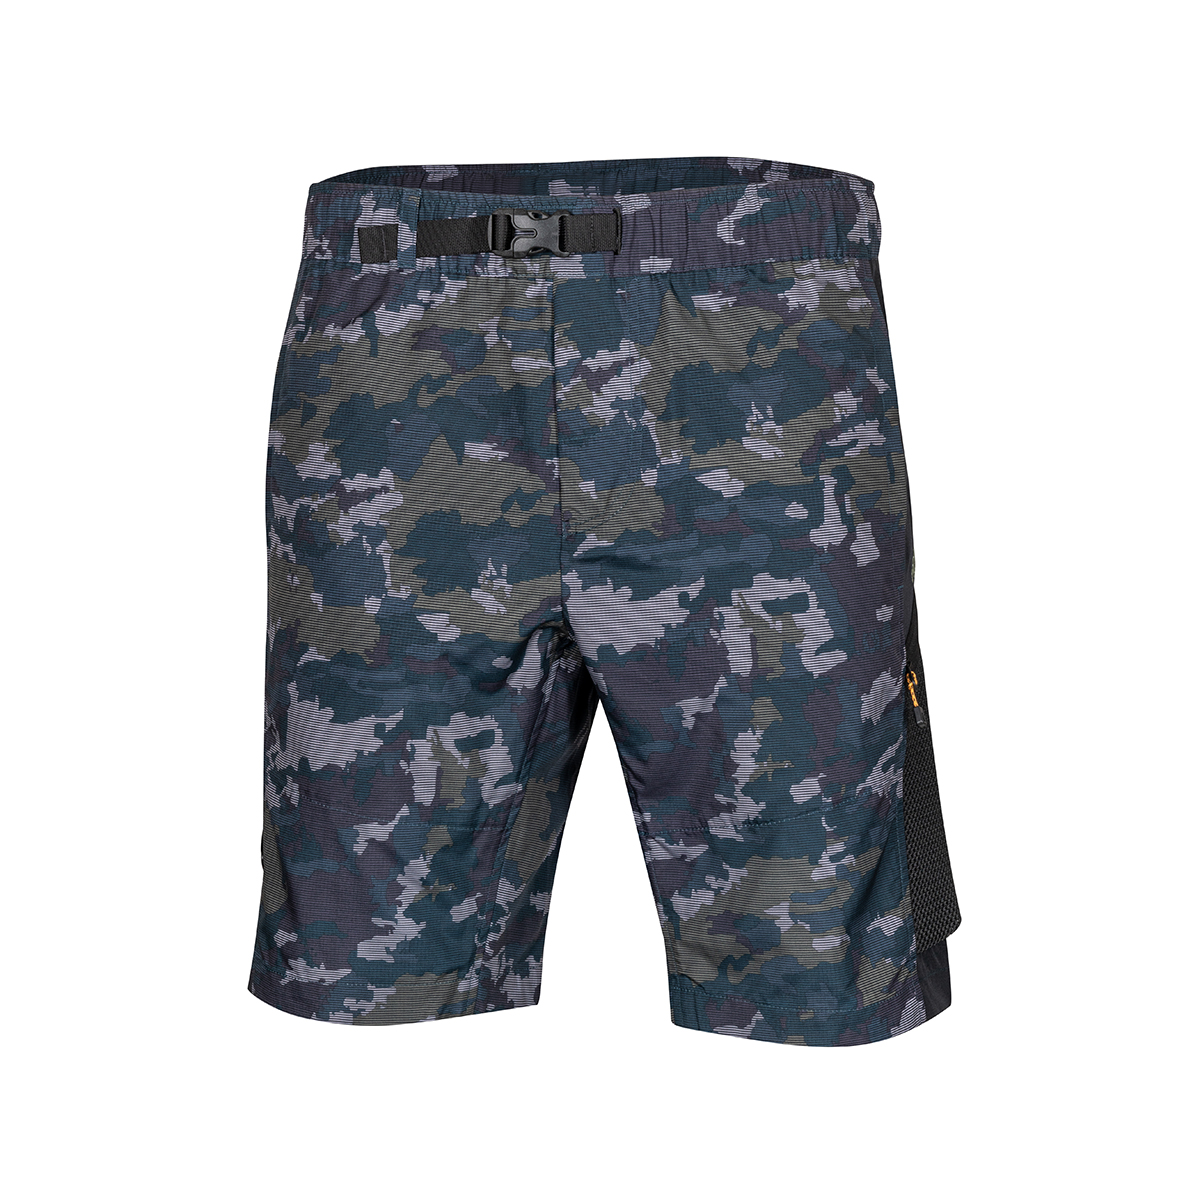 KL2 Nature of the Game Utility Short - New Balance